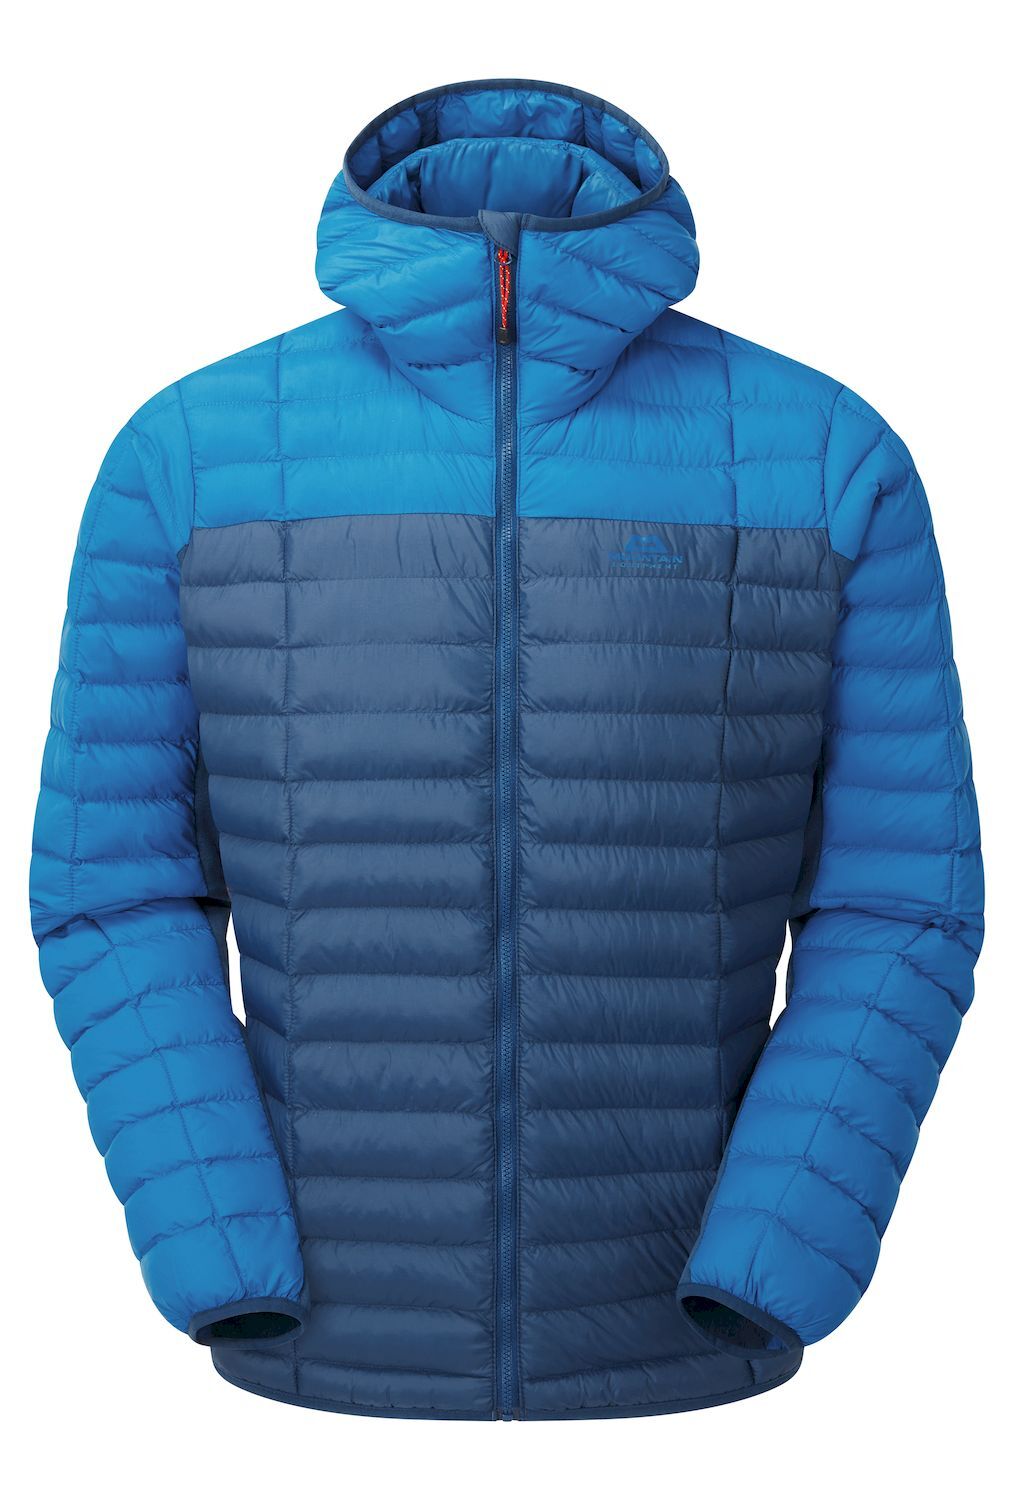 Mountain Equipment Particle Hooded Jacket - Synthetic jacket - Men's